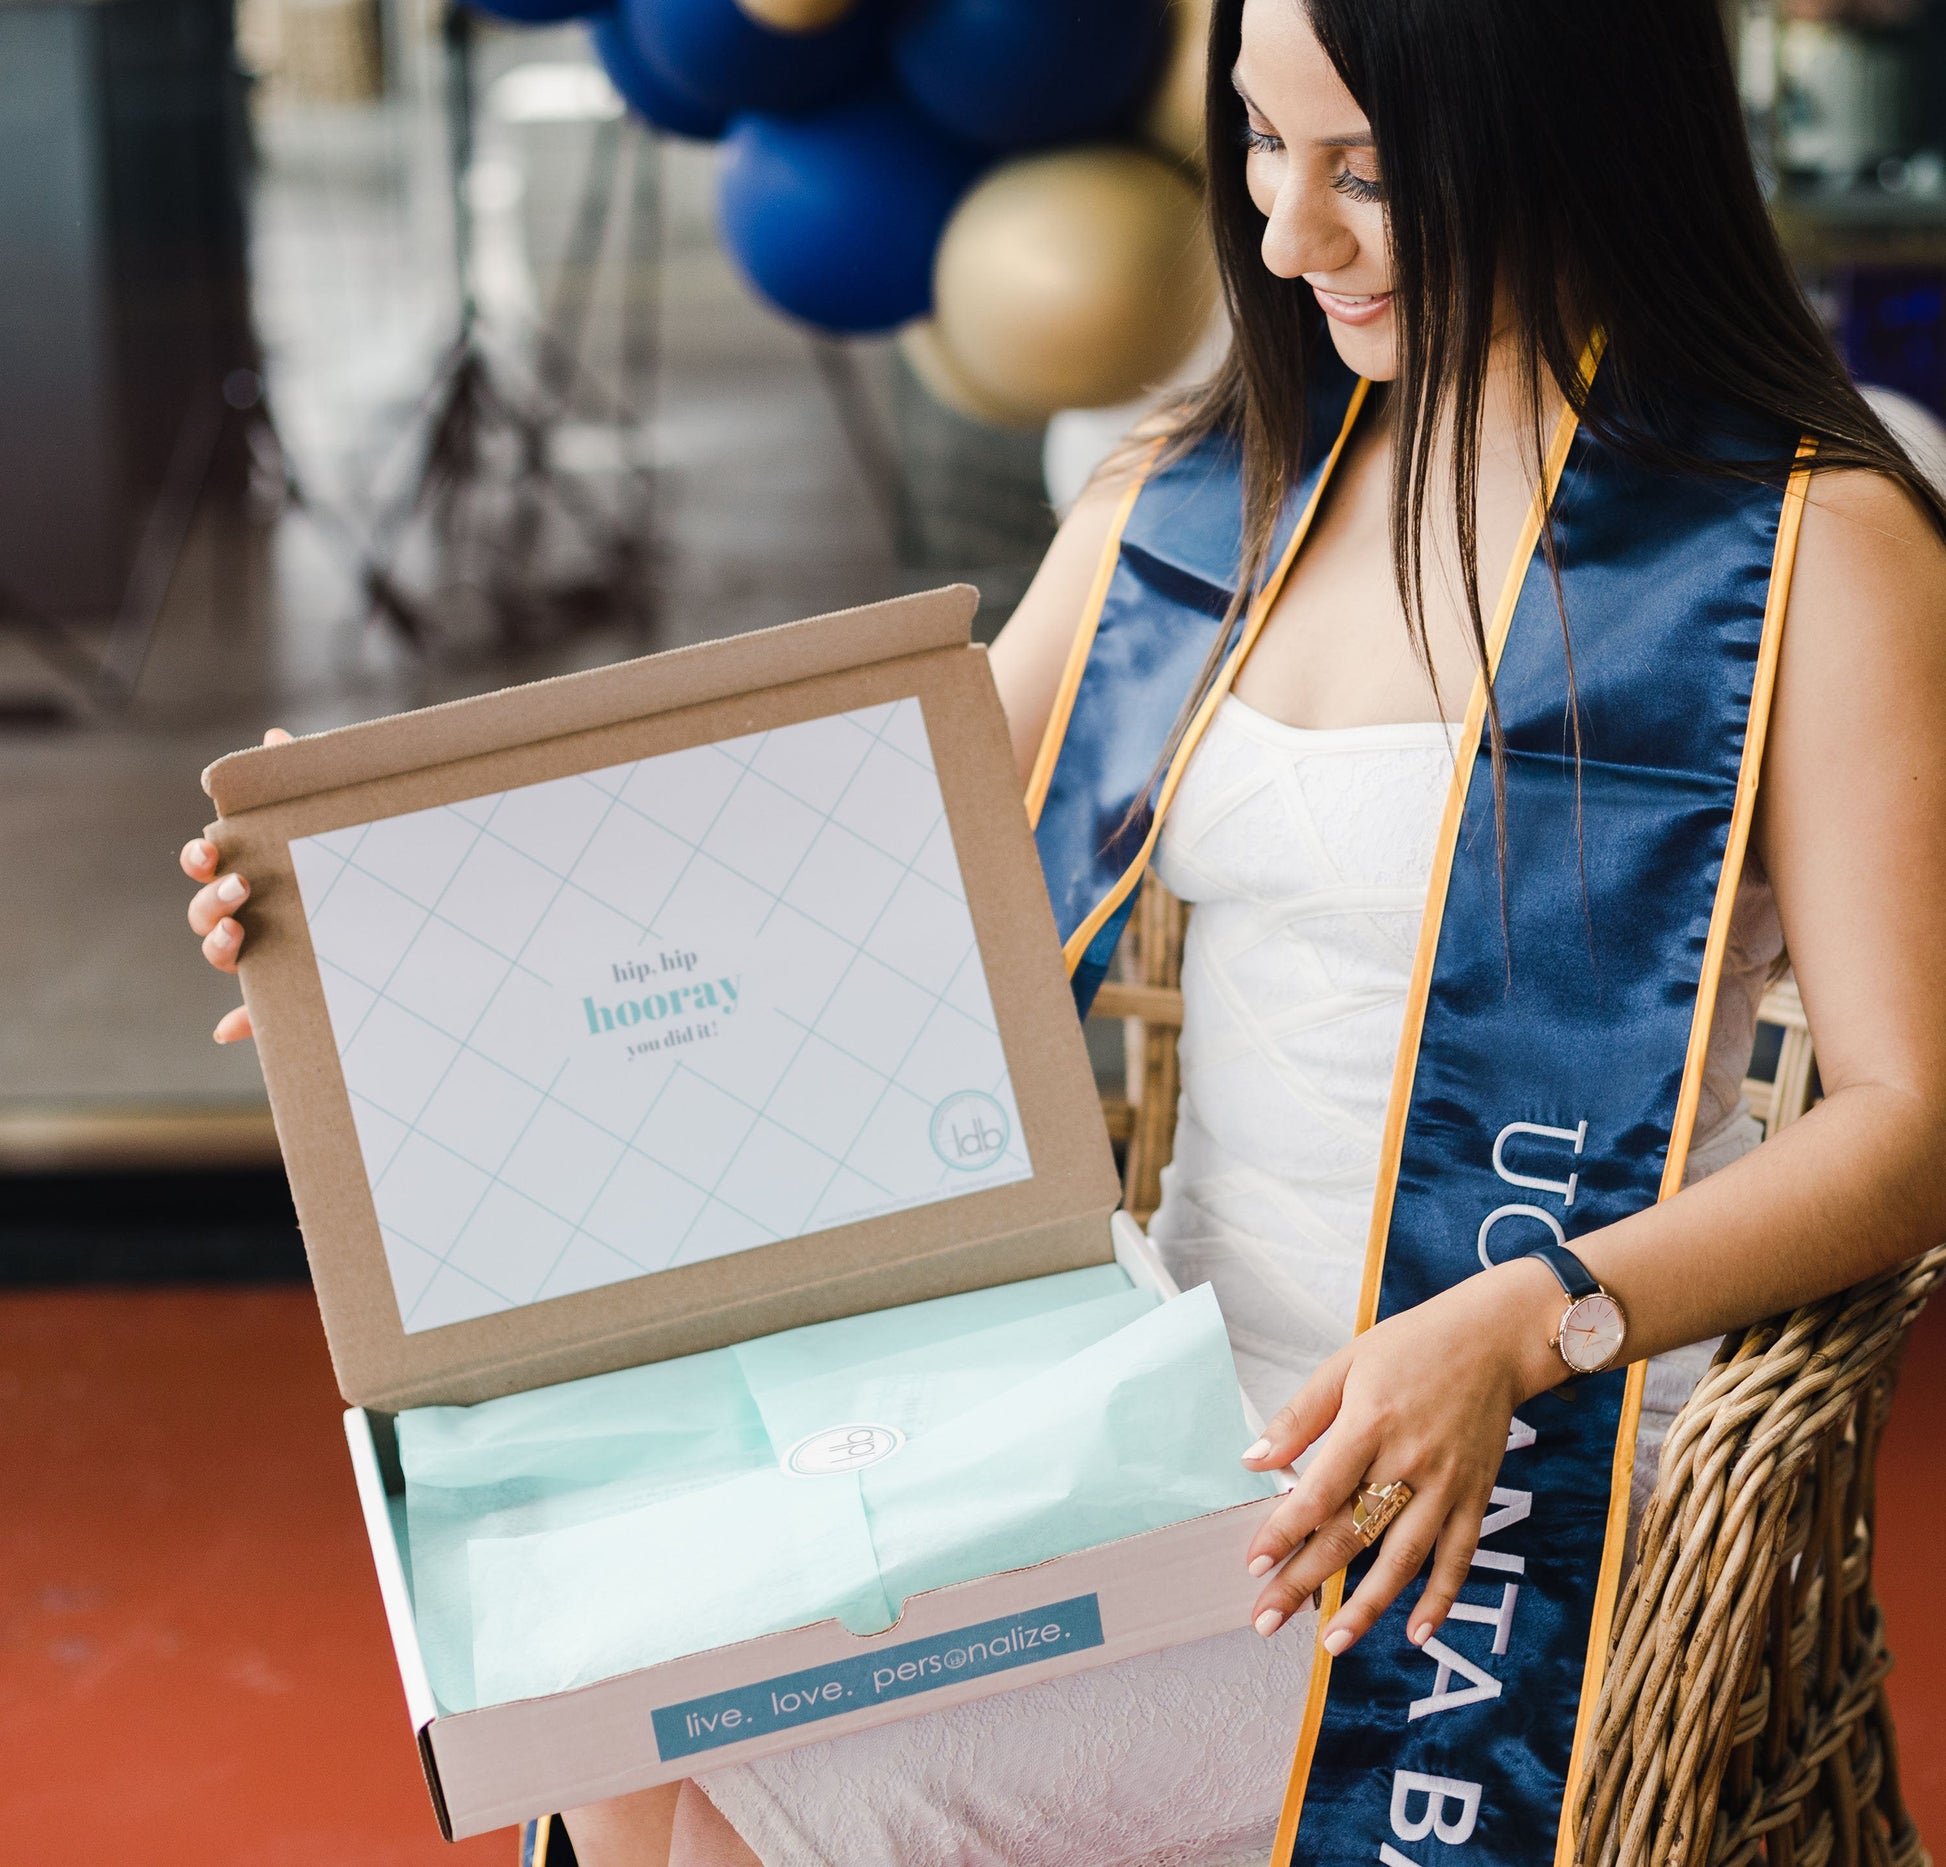 Grad Gifts for Girls, Grad Gifts for Her, Grad Gifts Box, Graduation Ideas, Graduation Gift Box, Graduation, Congratulations, College